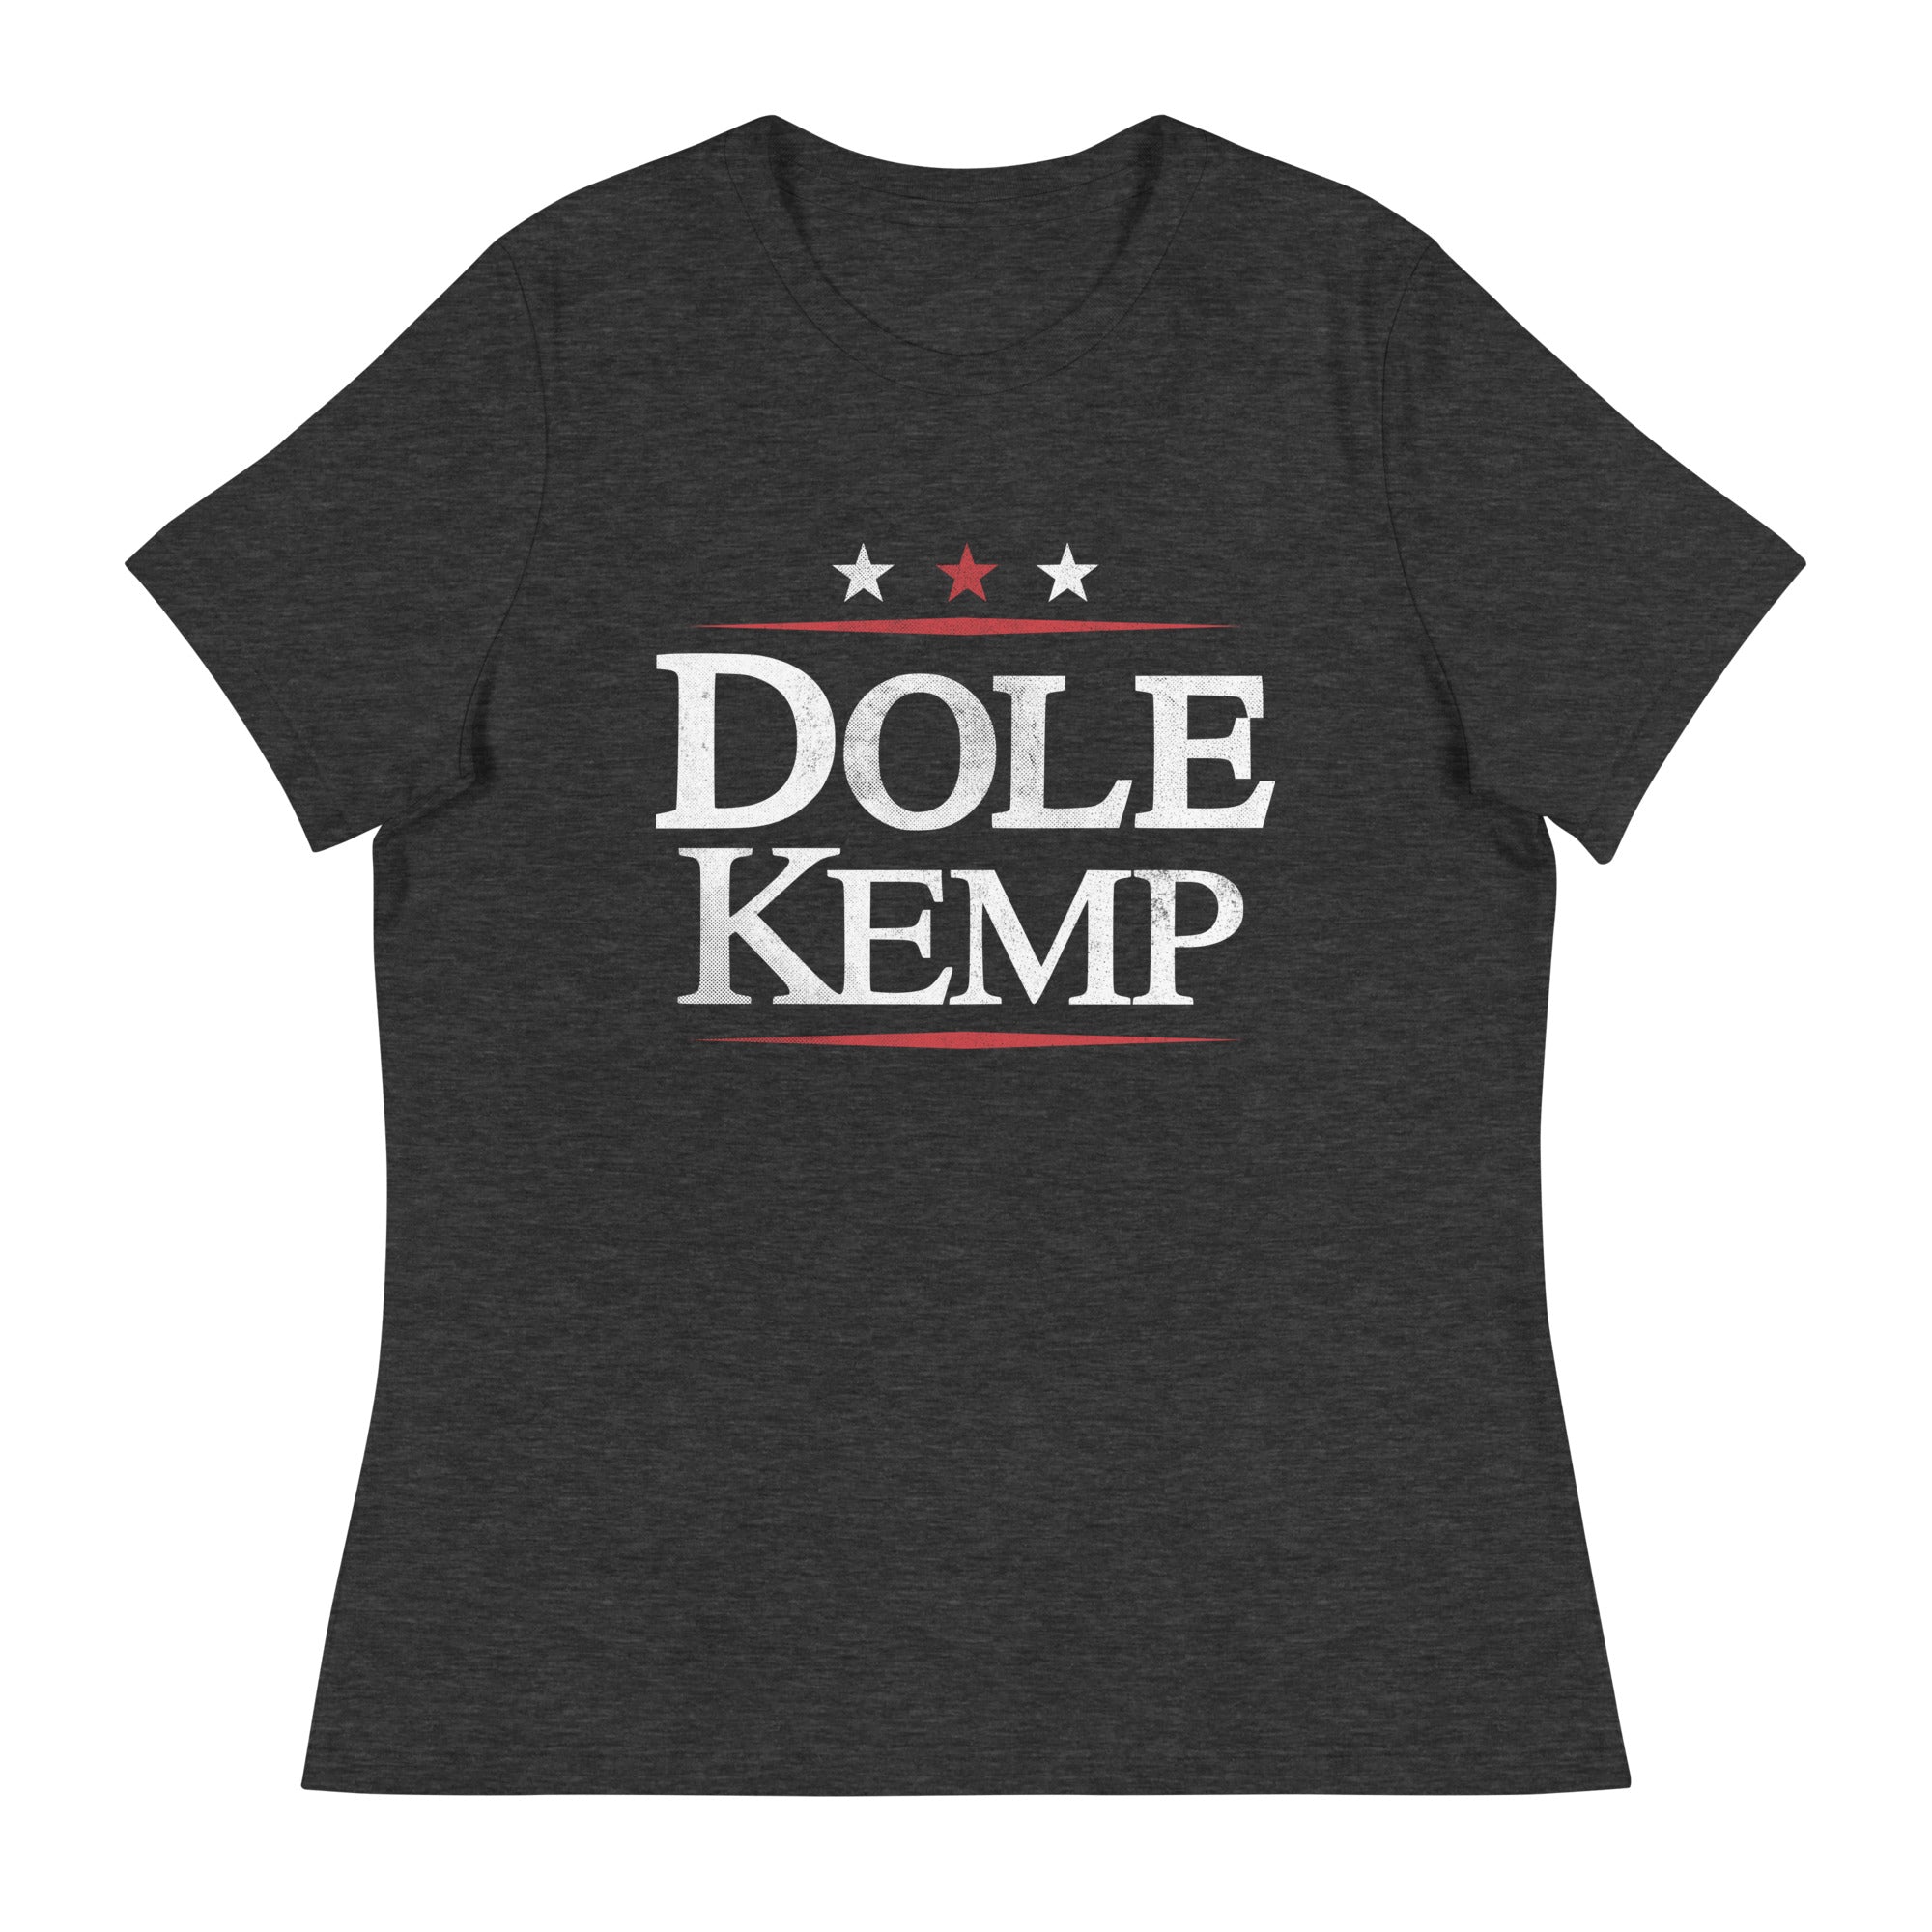 Dole Kemp 1996 Campaign Women's Relaxed T-Shirt